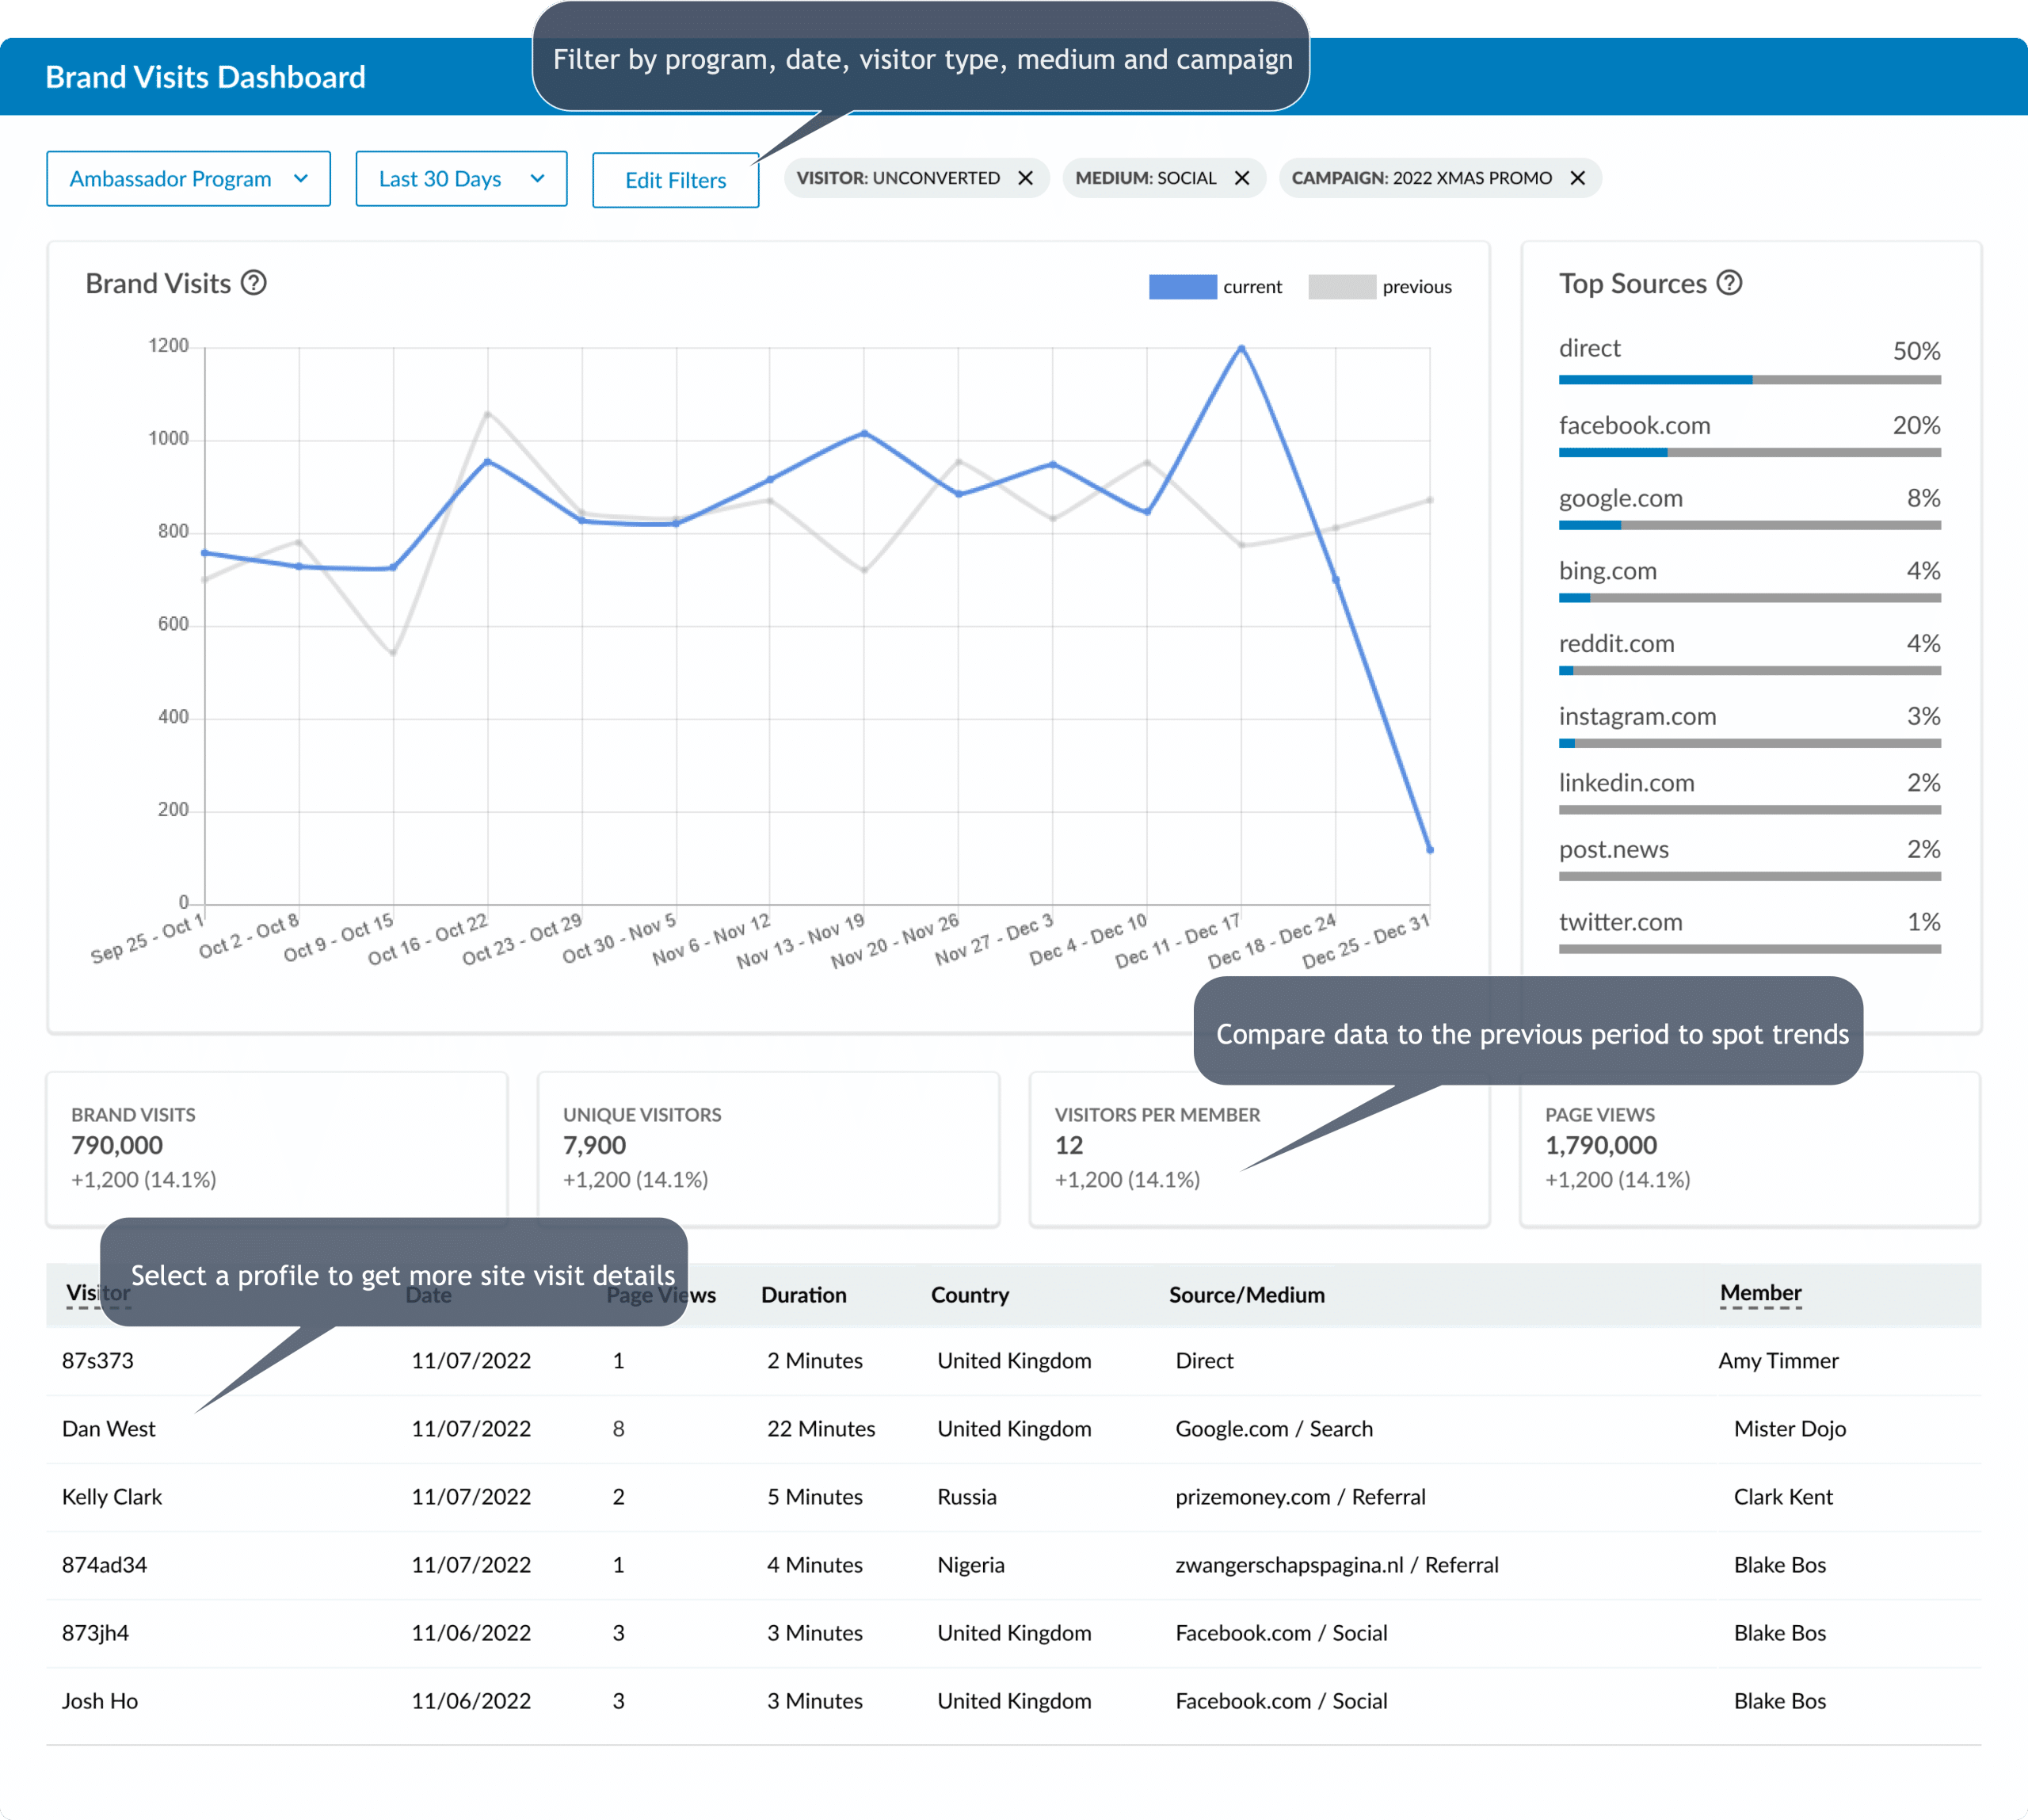 An image of the Brand Visits Dashboard highlighting the different features